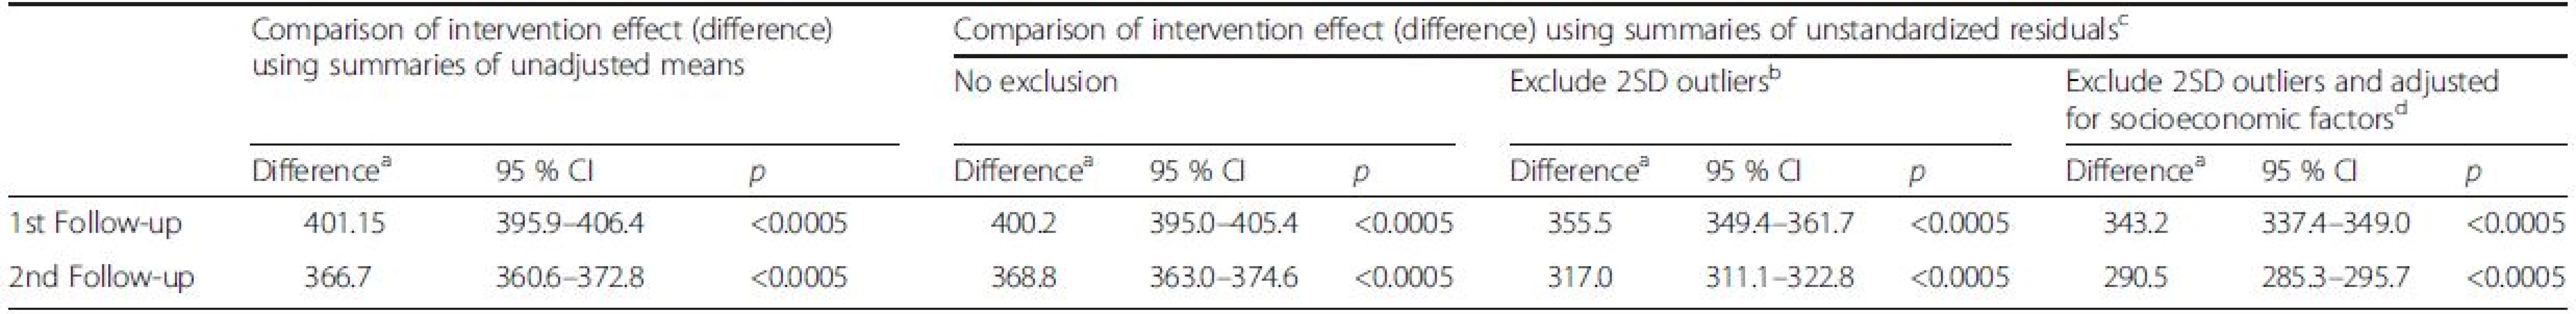 Changes in intervention effects (difference<sup>a</sup>) for calcium intake results at 1st and 2nd follow-up at cluster level: unadjusted versus adjusted and with versus without exclusions